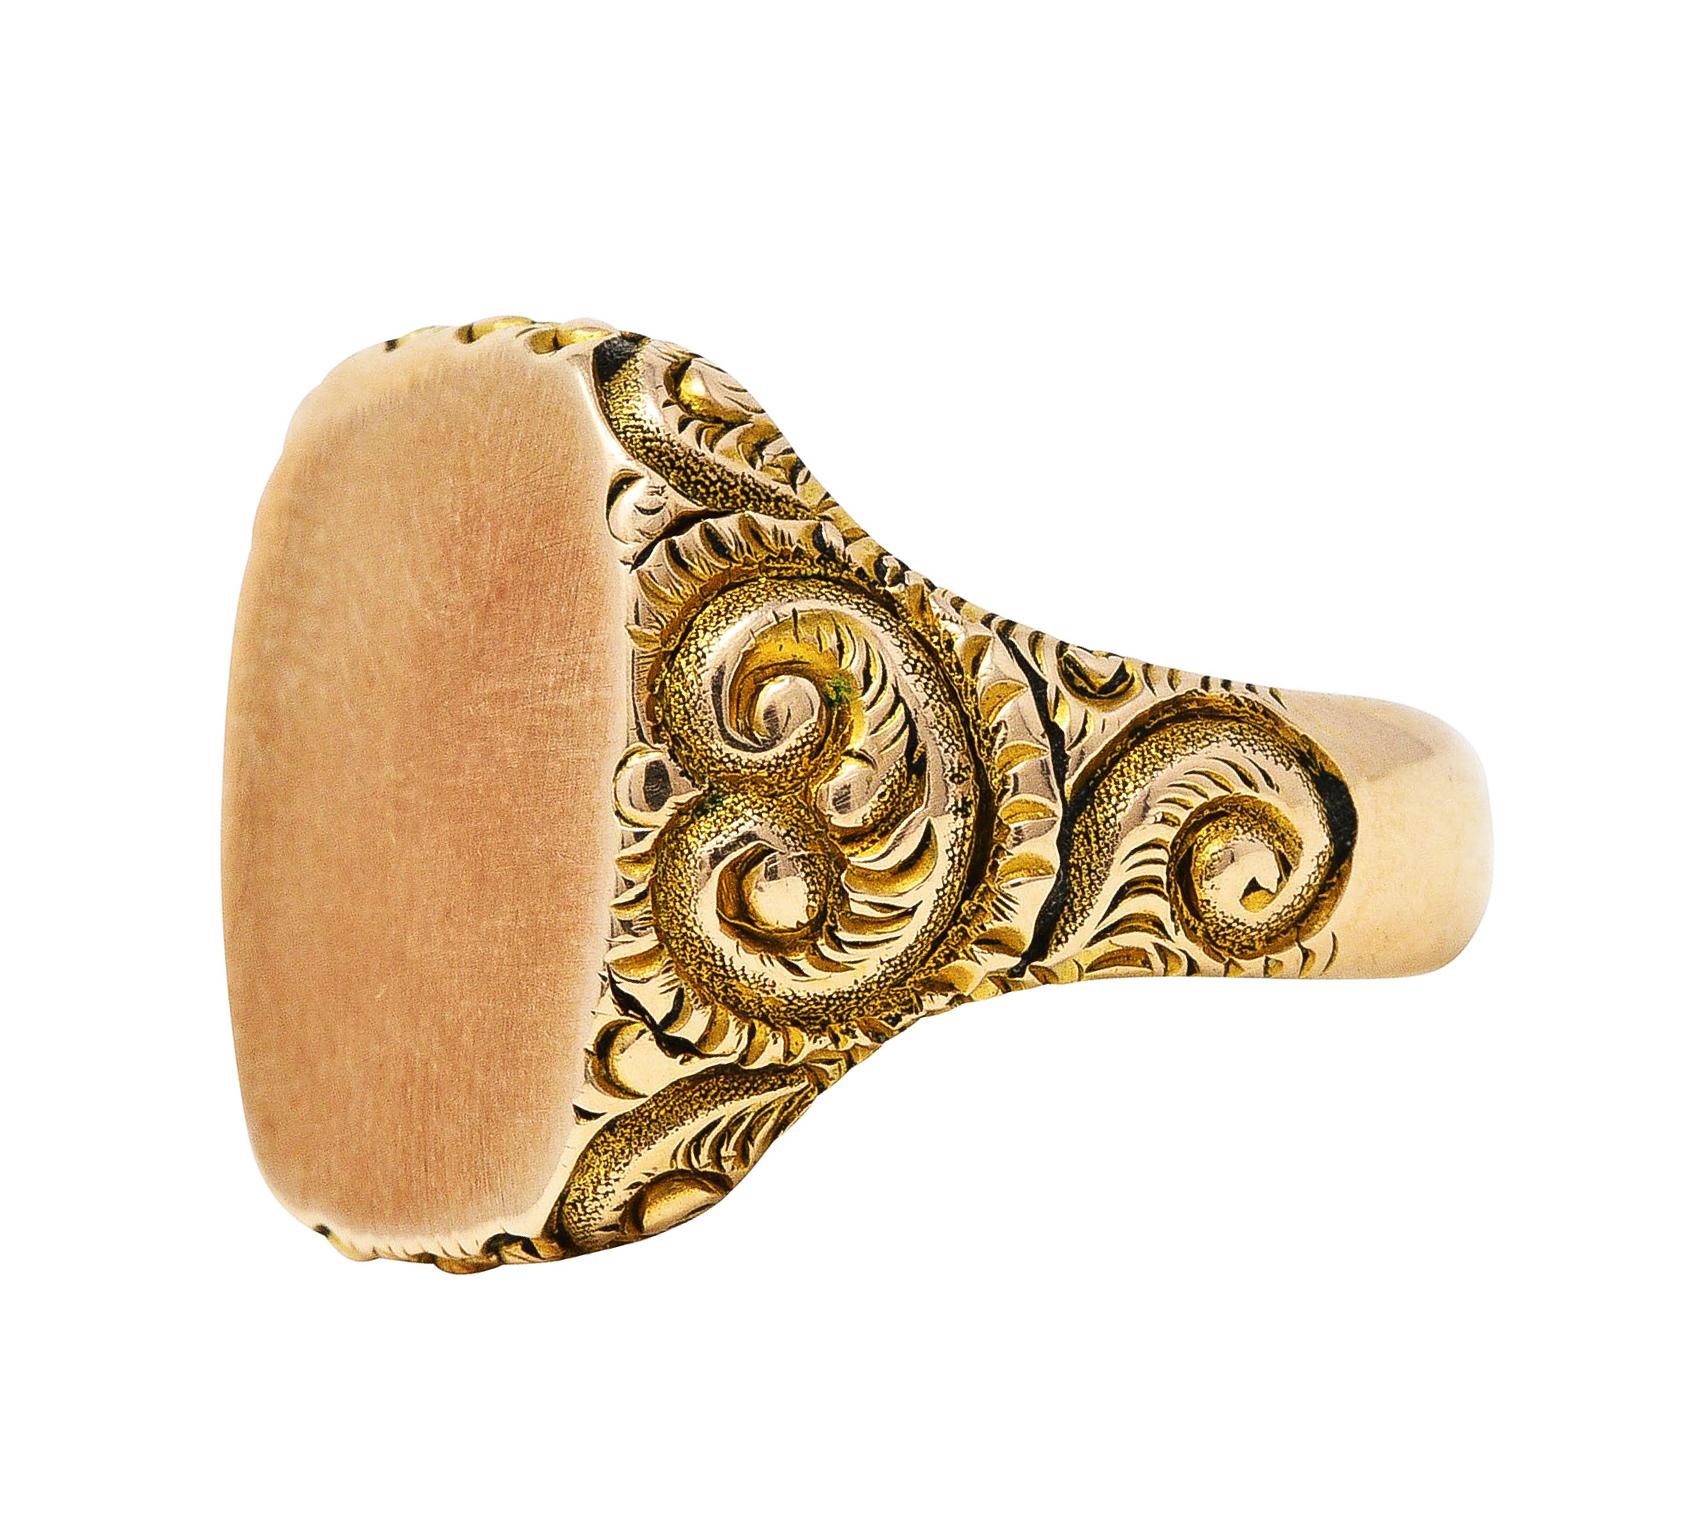 Signet style ring designed with cushion shaped face

Featuring deeply grooved scroll motif shoulders

Tested as 14 karat gold

Ring size: 6 and sizable

Measures: 15.5 mm North to South and sits 2.0 mm high

Total weight: 5.4 grams

Elegant.